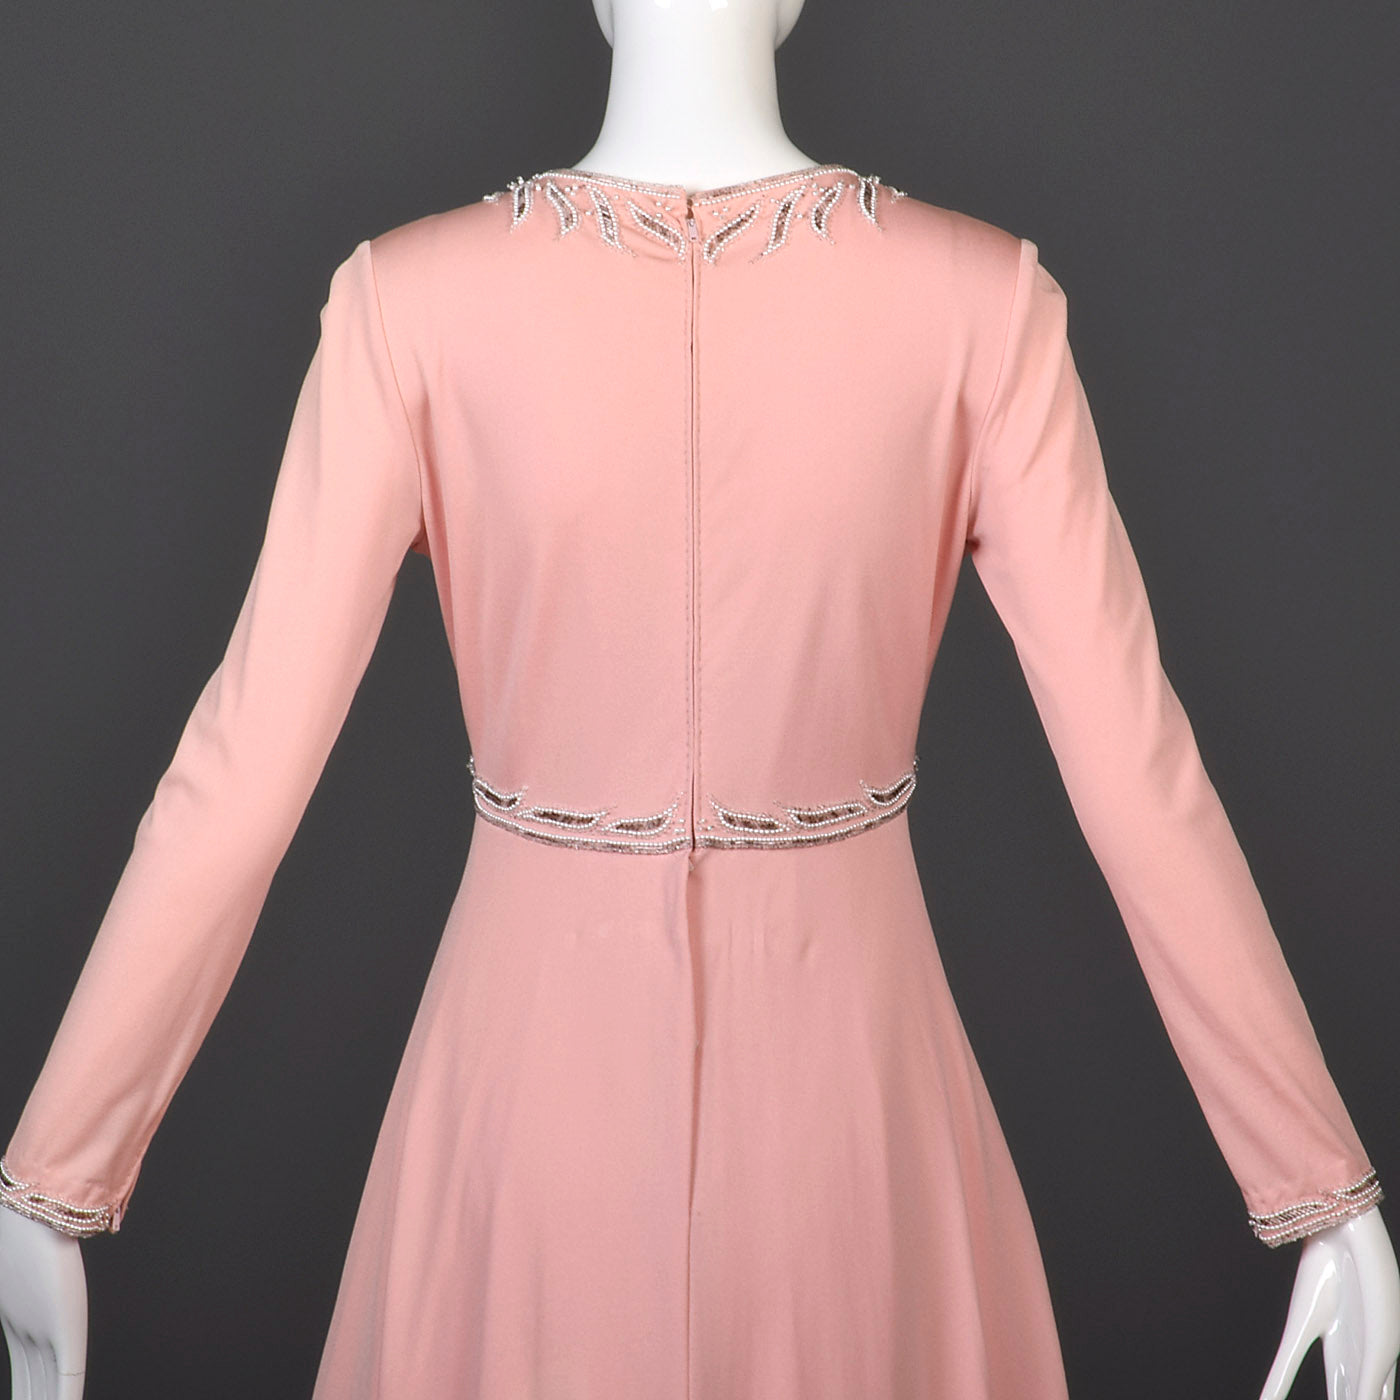 1960s Victoria Royal LTD Pink Formal Gown